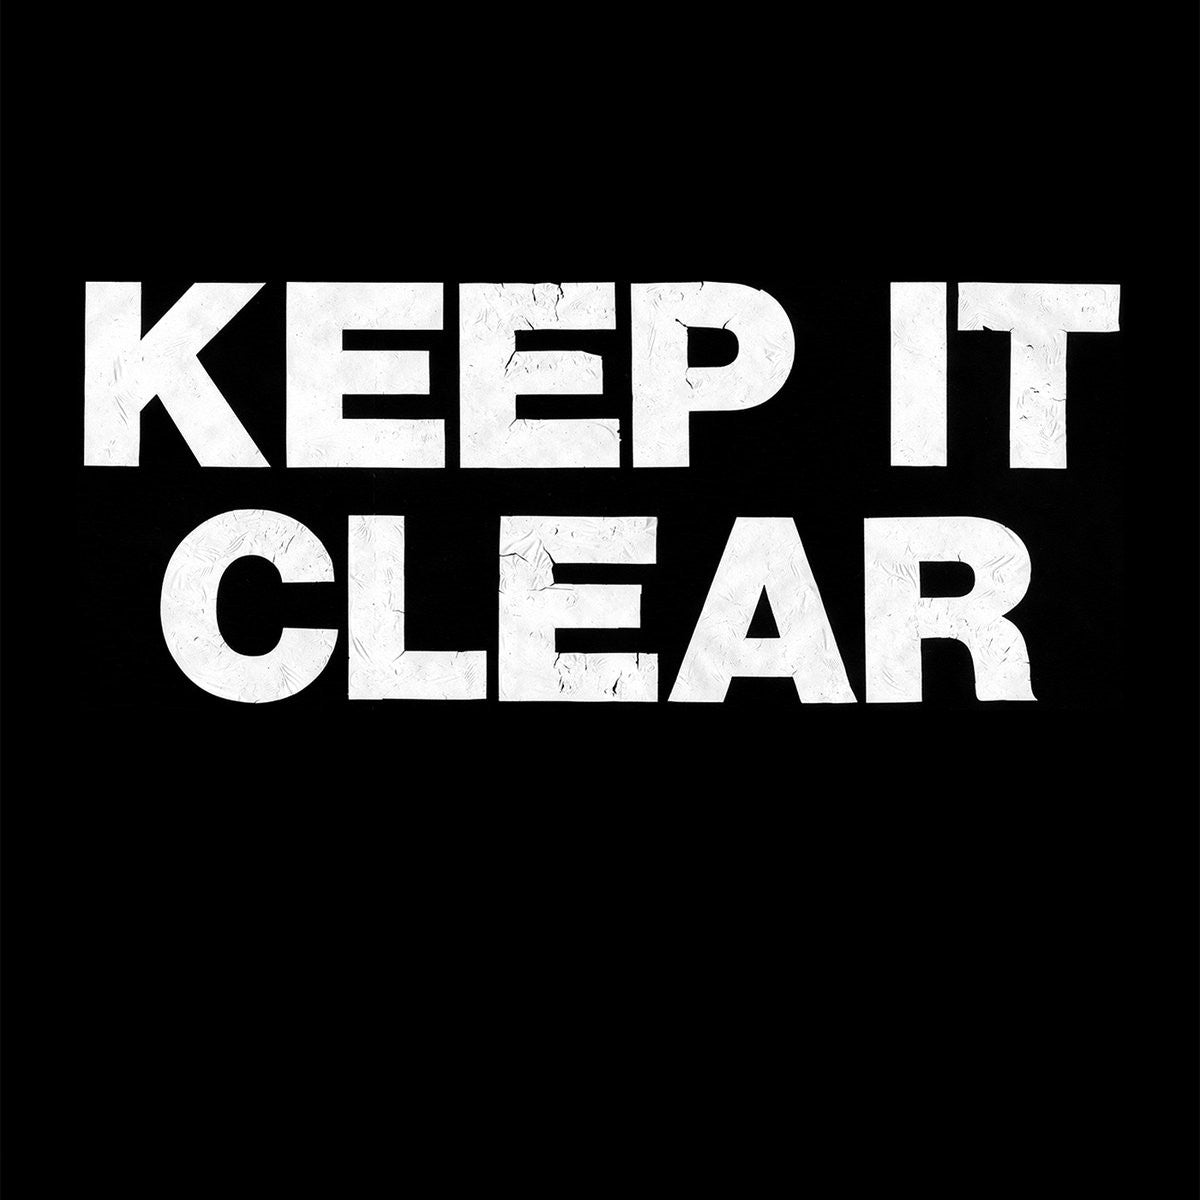 Keep Clear. Keep it. Is it Clear?. Keep it way. It was clear to them